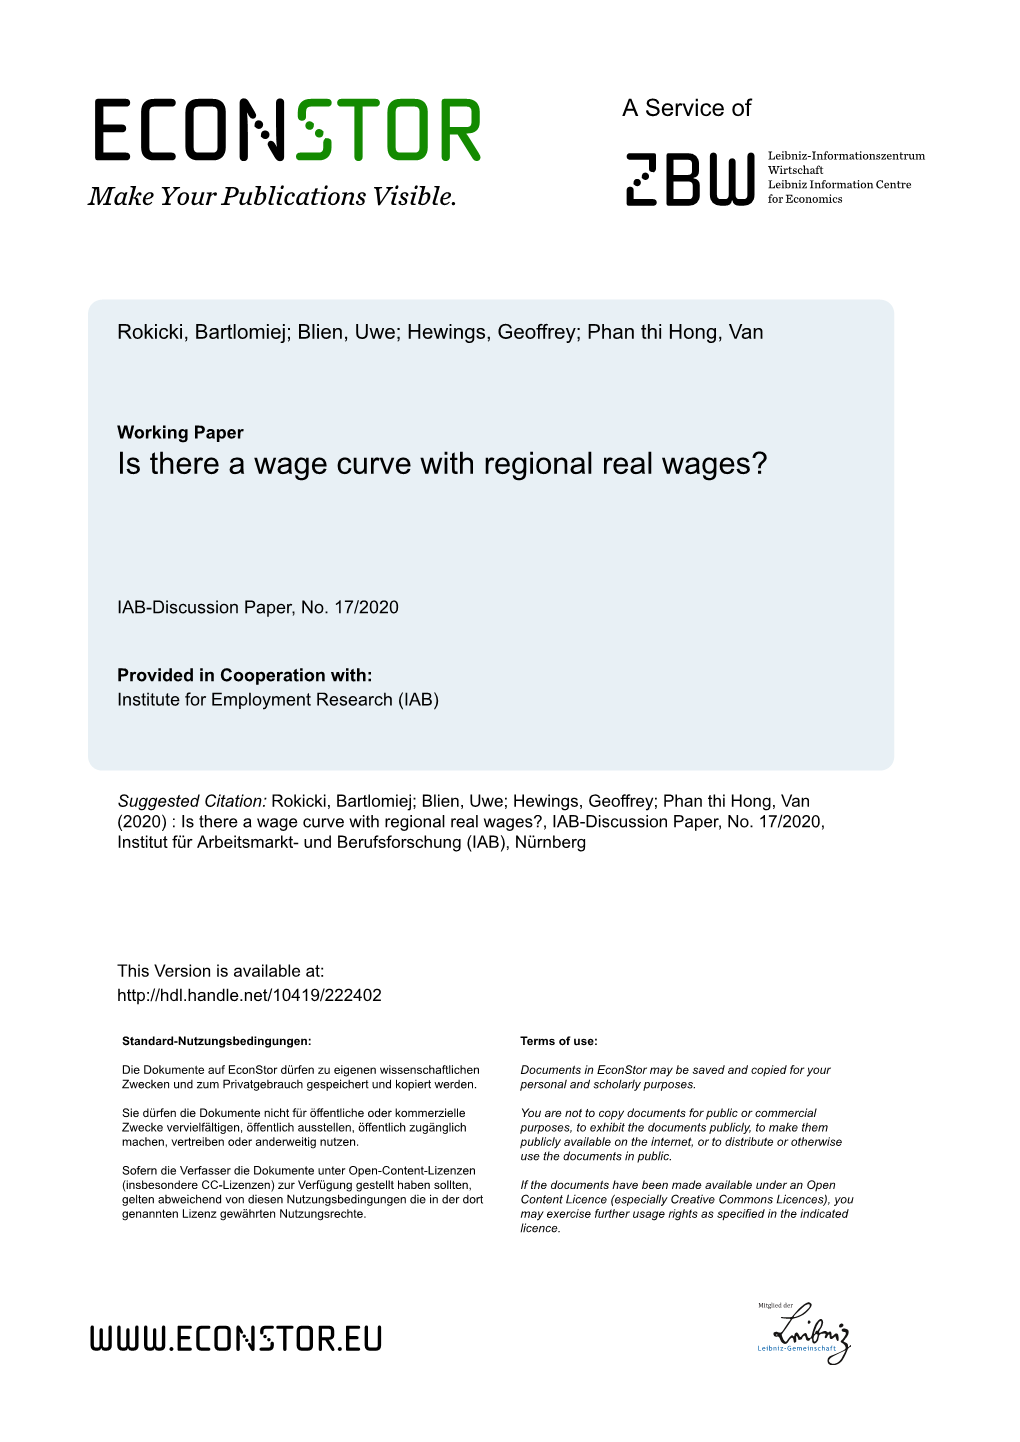 Is There a Wage Curve with Regional Real Wages?